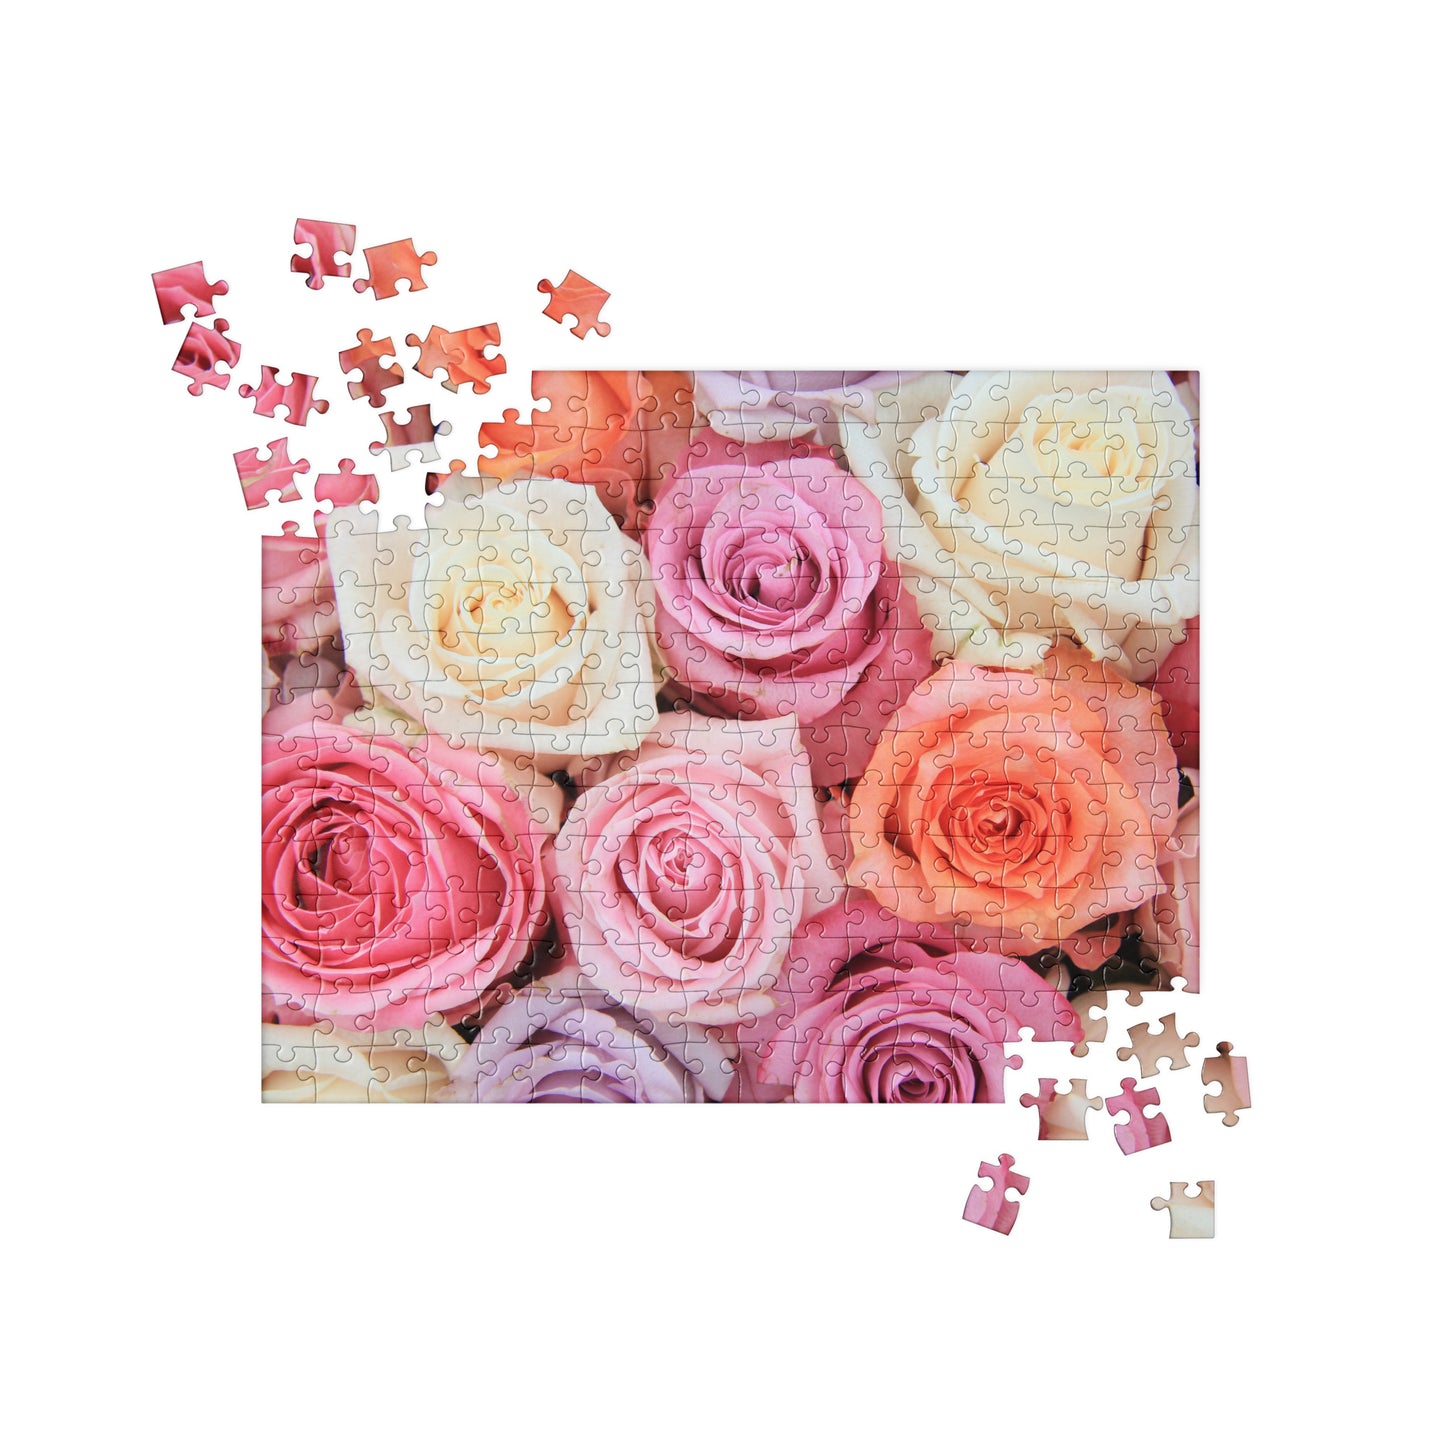 Floral Jigsaw Puzzle: Multi-Color Roses